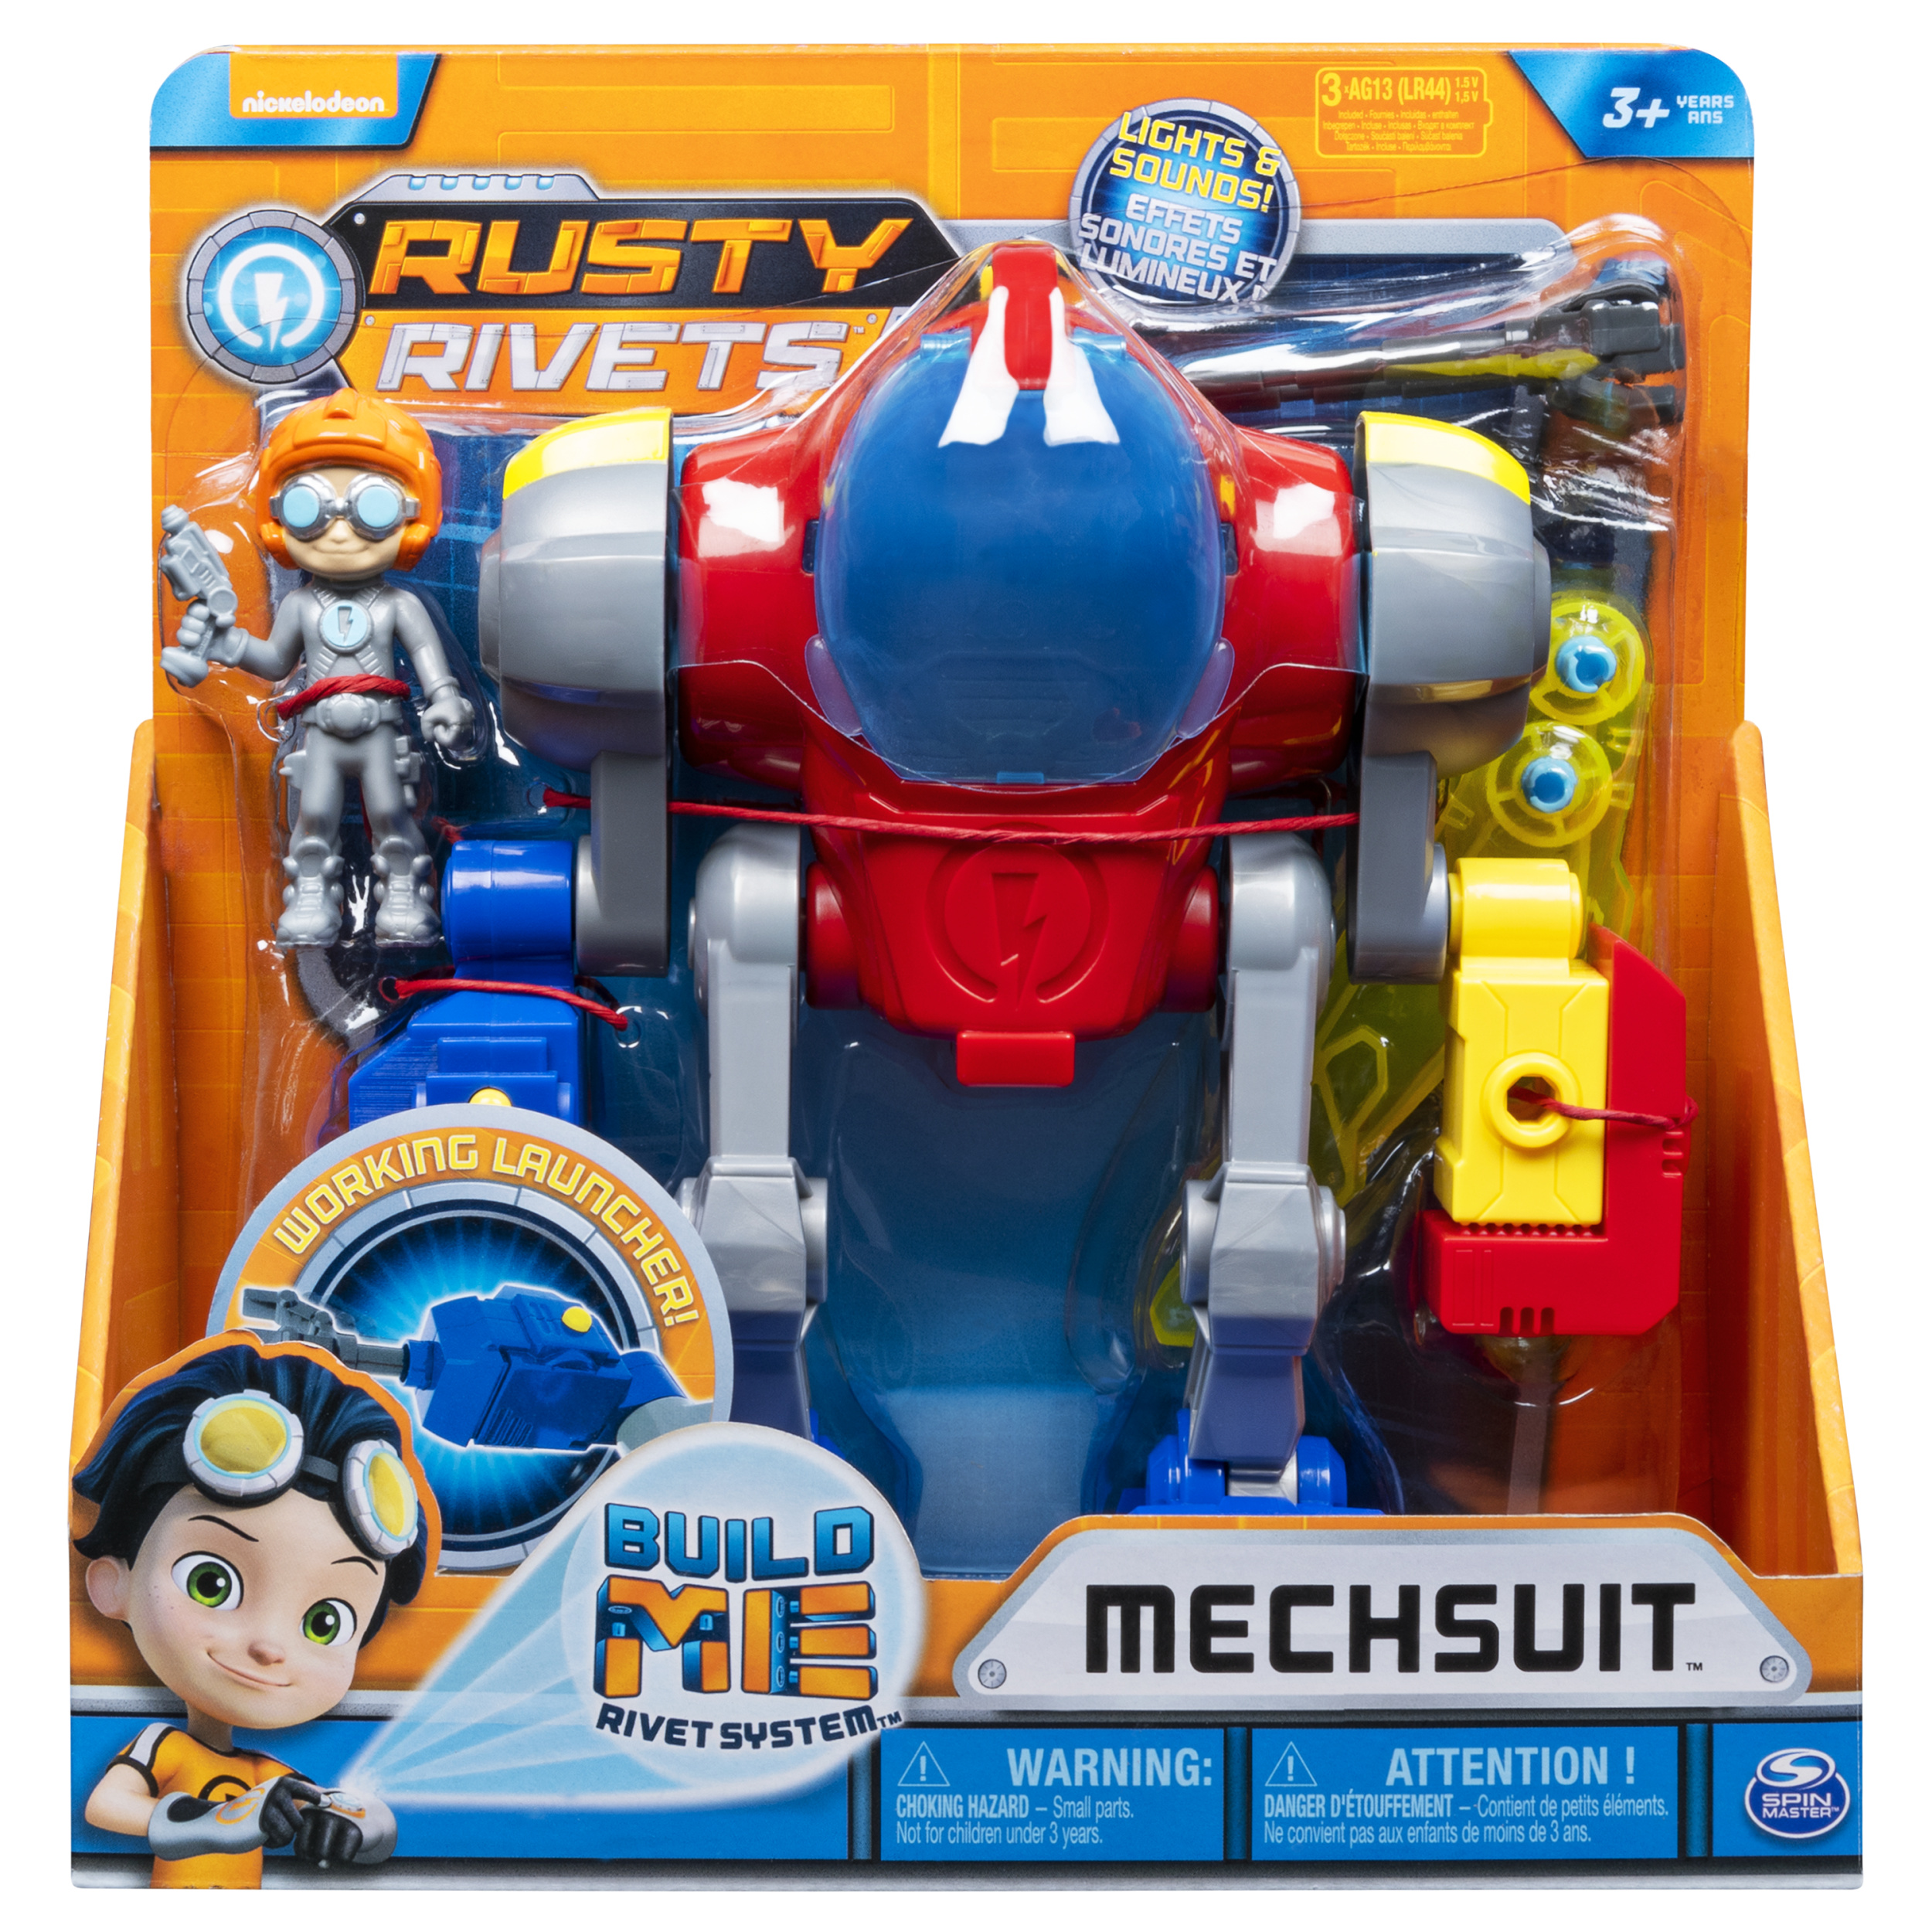 Rusty Rivets, Mechsuit, Snap'n Build Construction with Lights, Sounds, and Rusty Figure, for Ages 3 and up - image 2 of 8